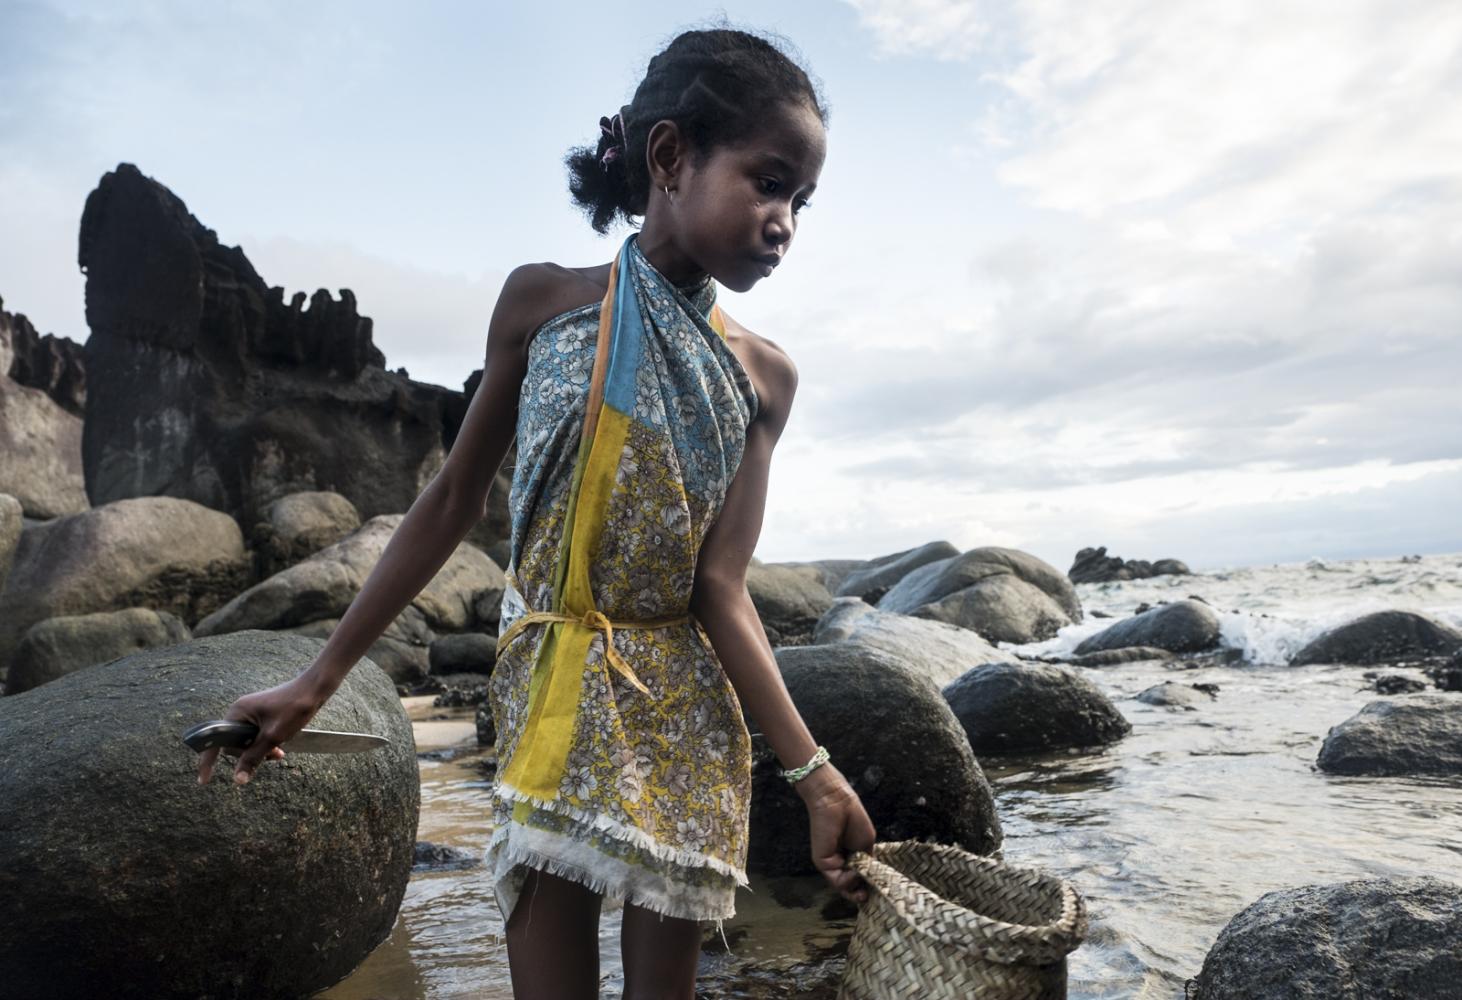 Image from HEALTH - Patricia is a 13yr old who lives in the coastal village...